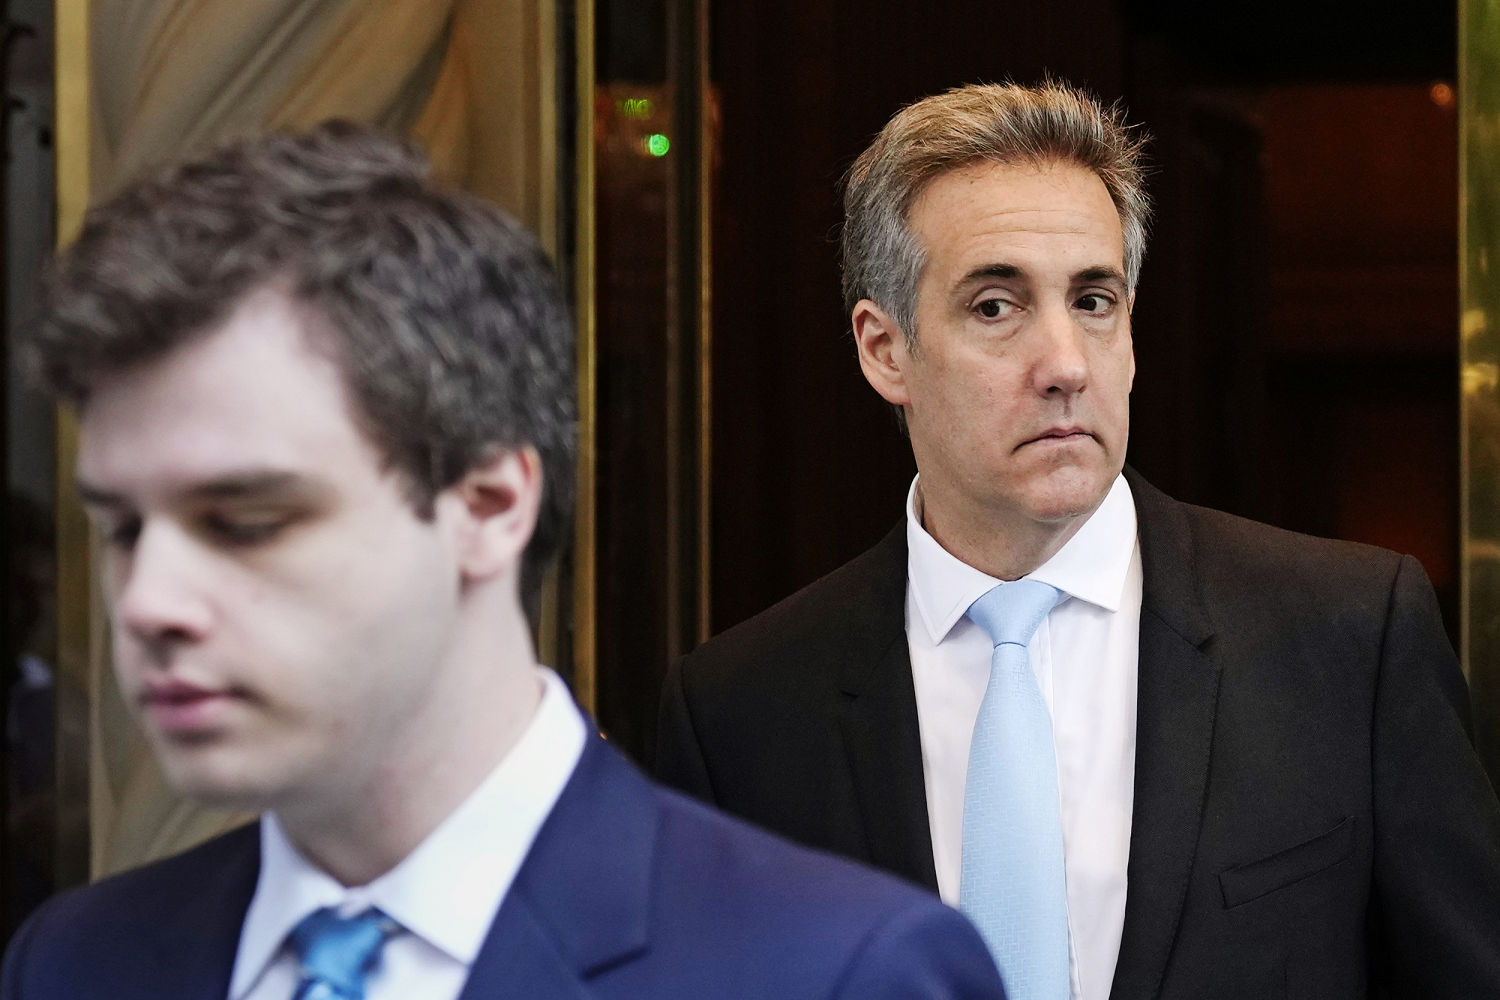 Michael Cohen expected to detail how Trump reimbursed him for hush money payment